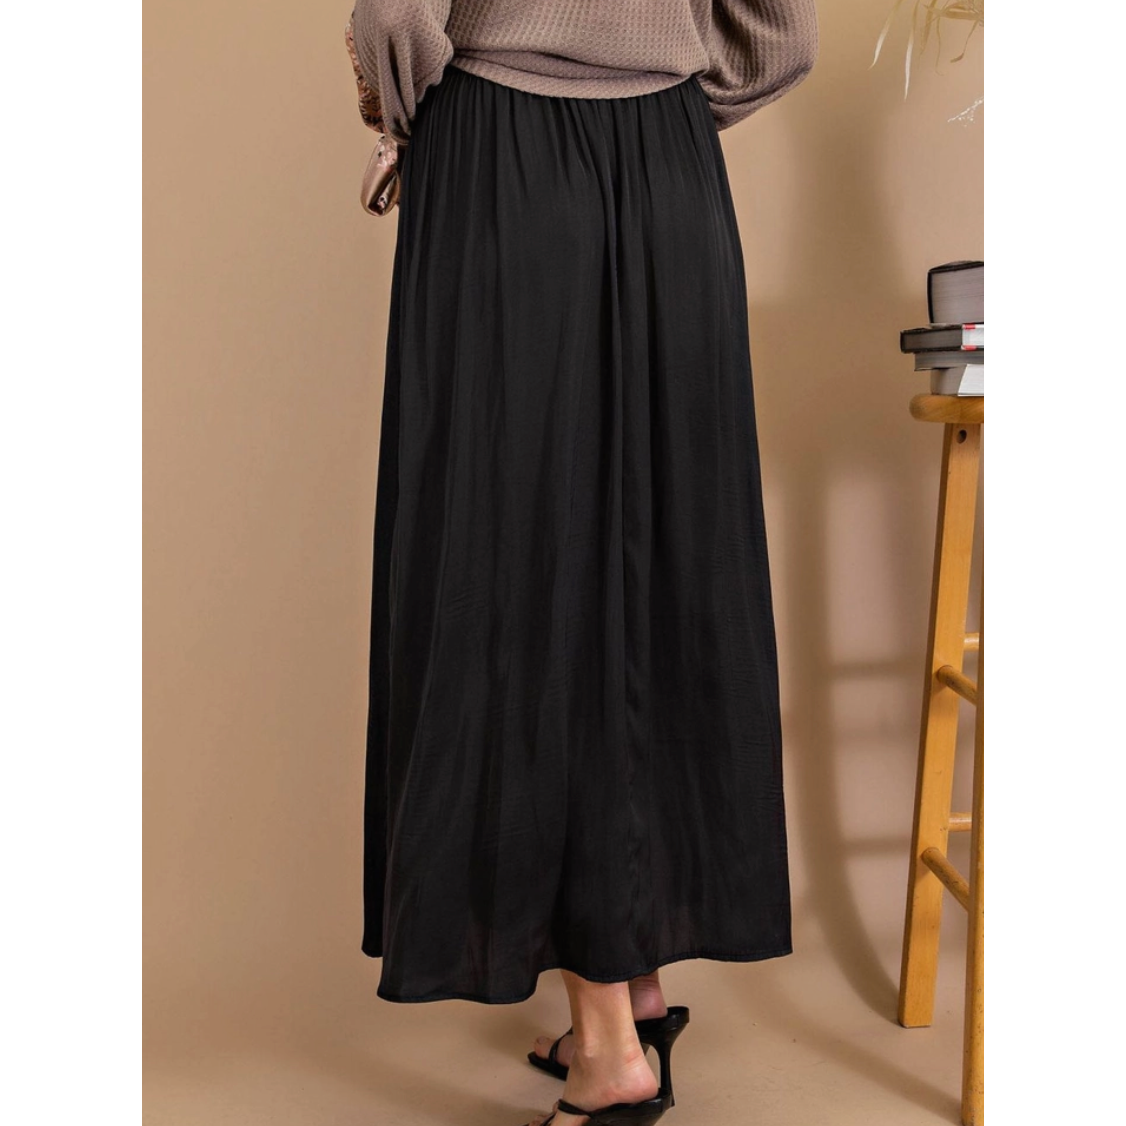 Black A-Line Skirt With Pockets